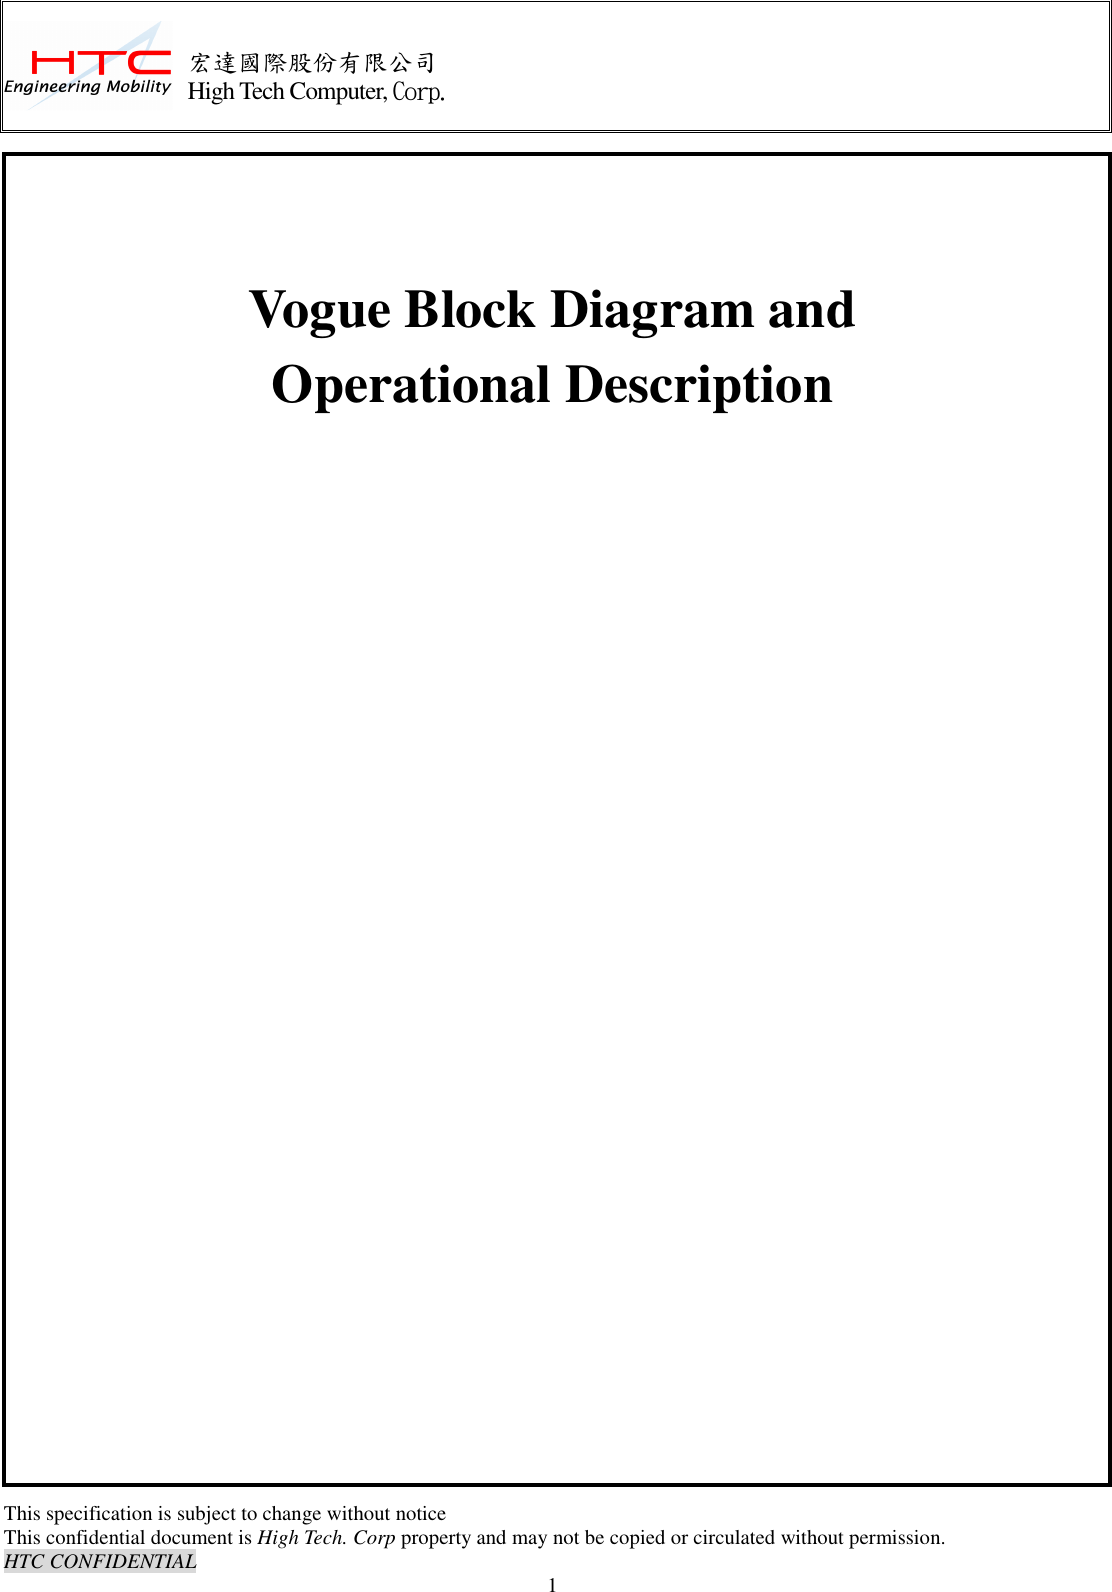      This specification is subject to change without notice This confidential document is High Tech. Corp property and may not be copied or circulated without permission. HTC CONFIDENTIAL                                    1 宏達國際股份有限公司 High Tech Computer, Corp.    Vogue Block Diagram and   Operational Description                                      